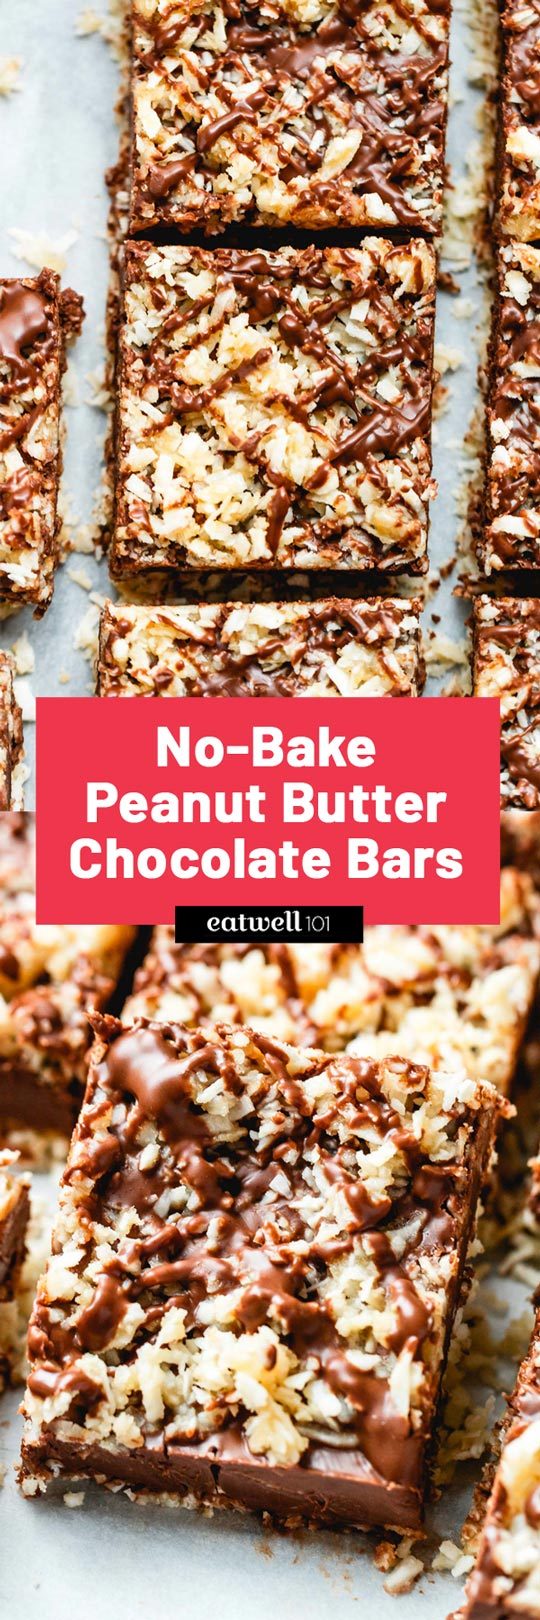 No-Bake Peanut Butter Chocolate Coconut Bars - These satisfying chocolate peanut butter coconut bars require no baking and are completely sugar free.